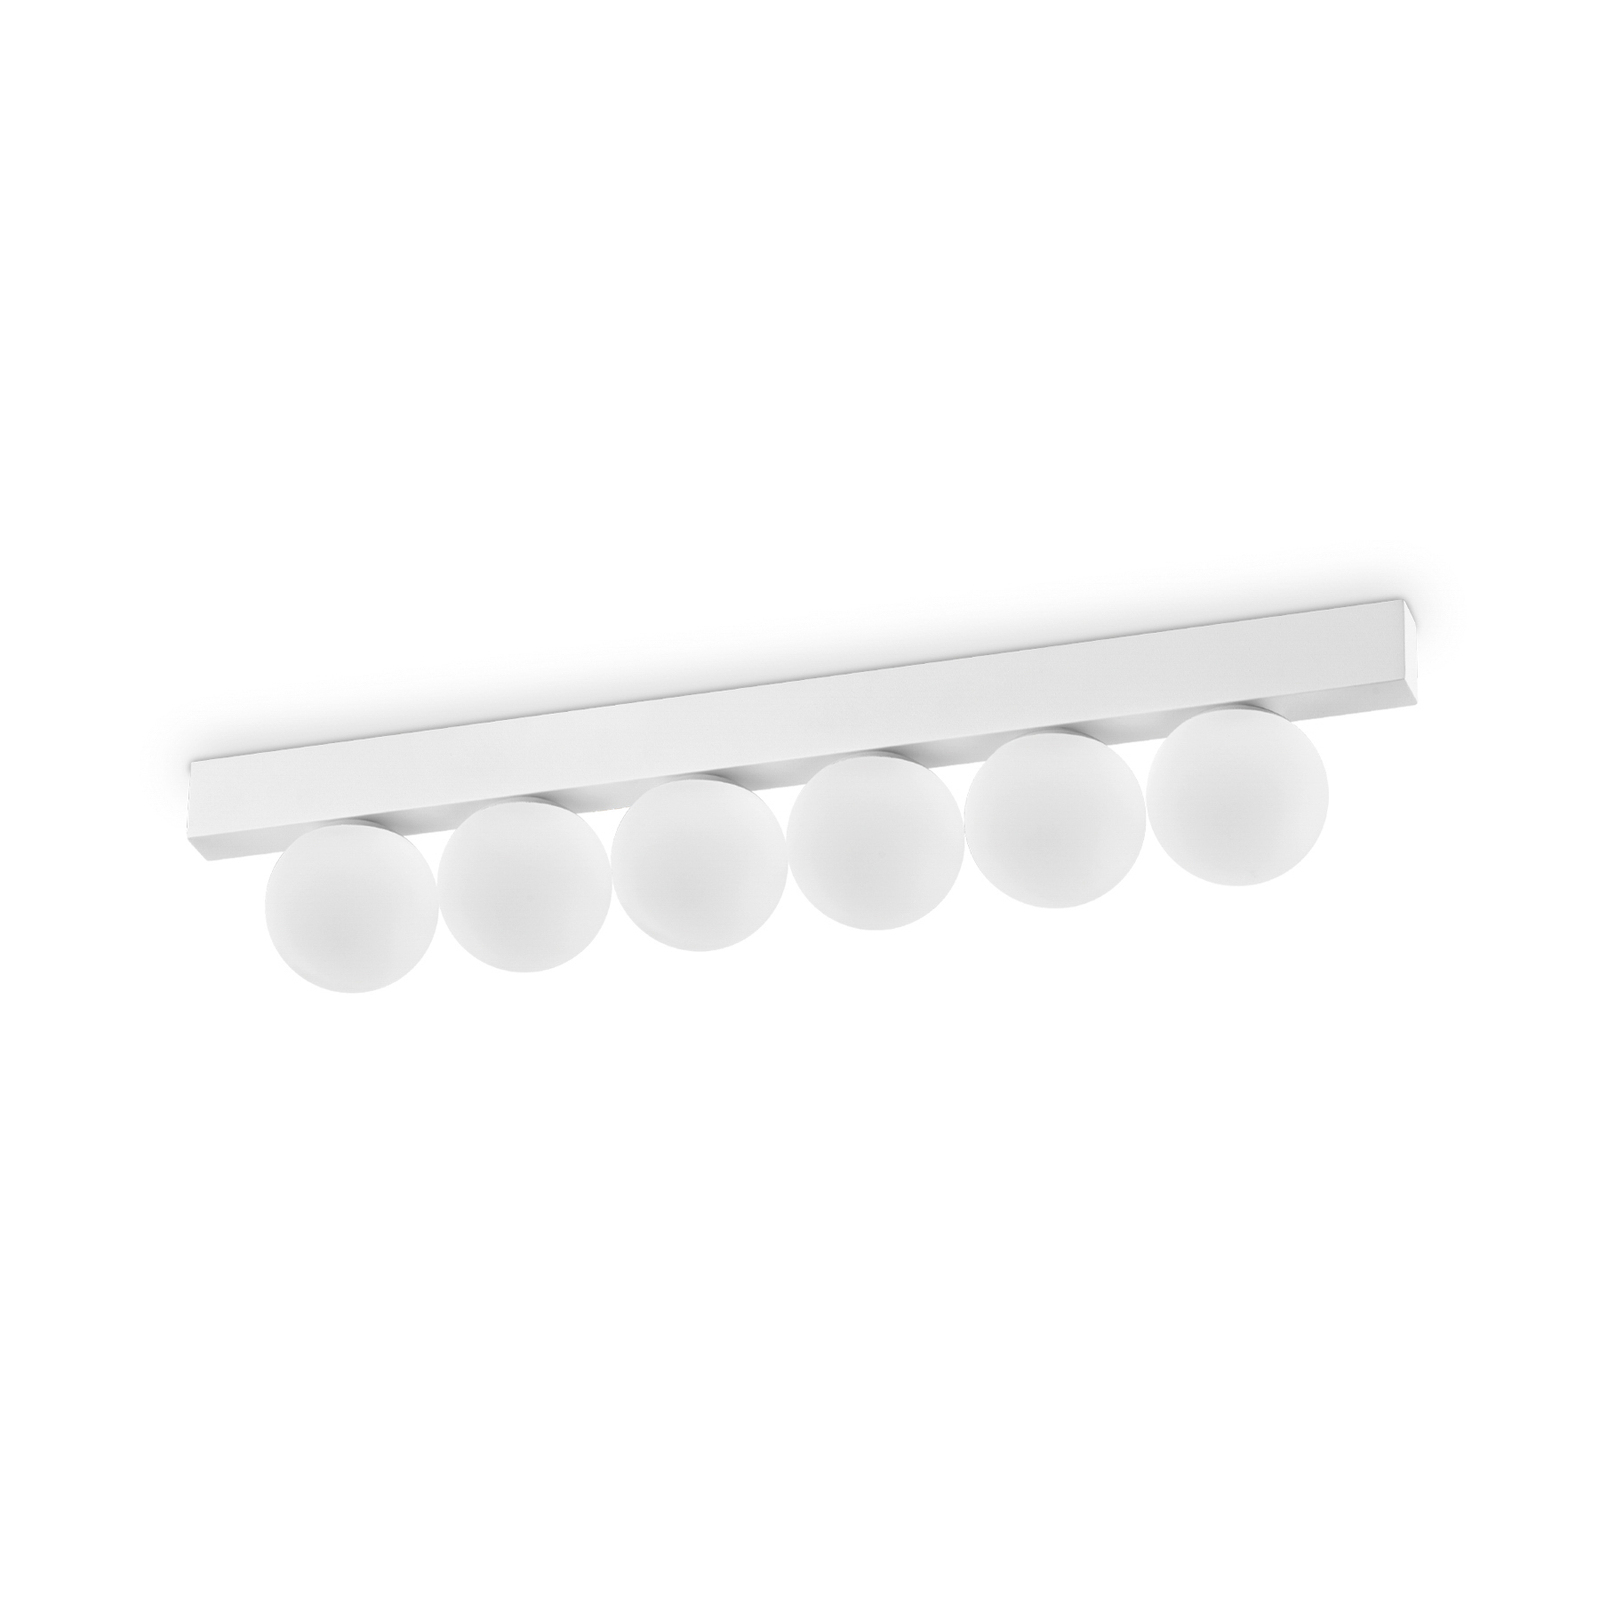 Ideal Lux Plafonnier LED Ping Pong blanc à 6 lampes, verre opalin